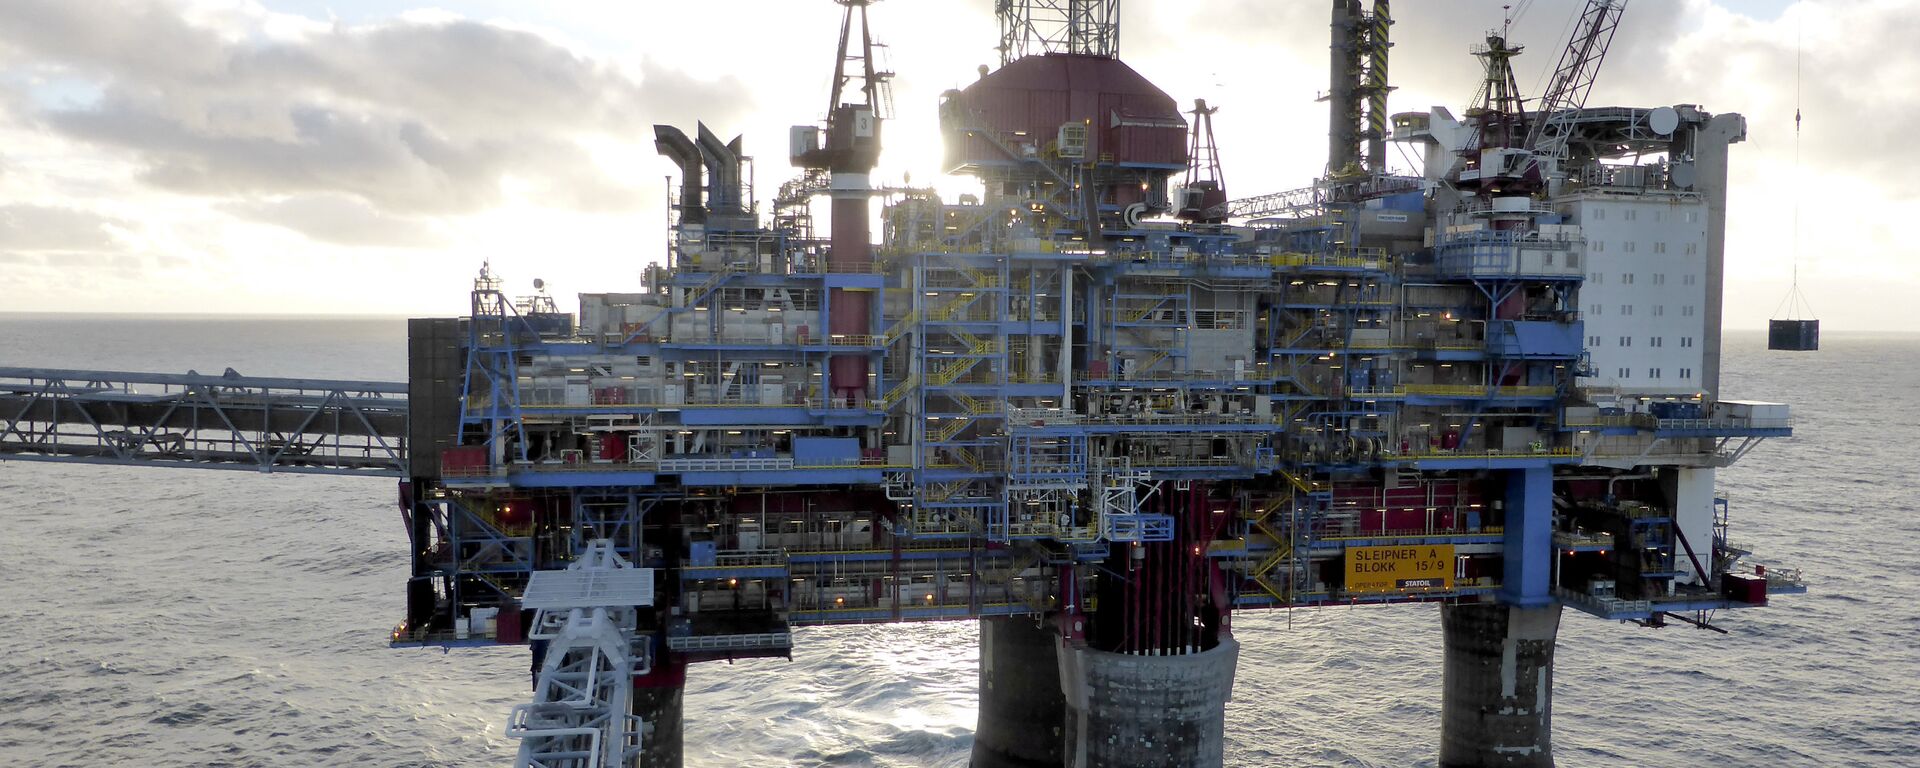 Oil and gas company Statoil drilling and accommodation platform Sleipner A is pictured in the offshore near the Stavanger, Norway, February 11, 2016 - Sputnik Mundo, 1920, 28.09.2021